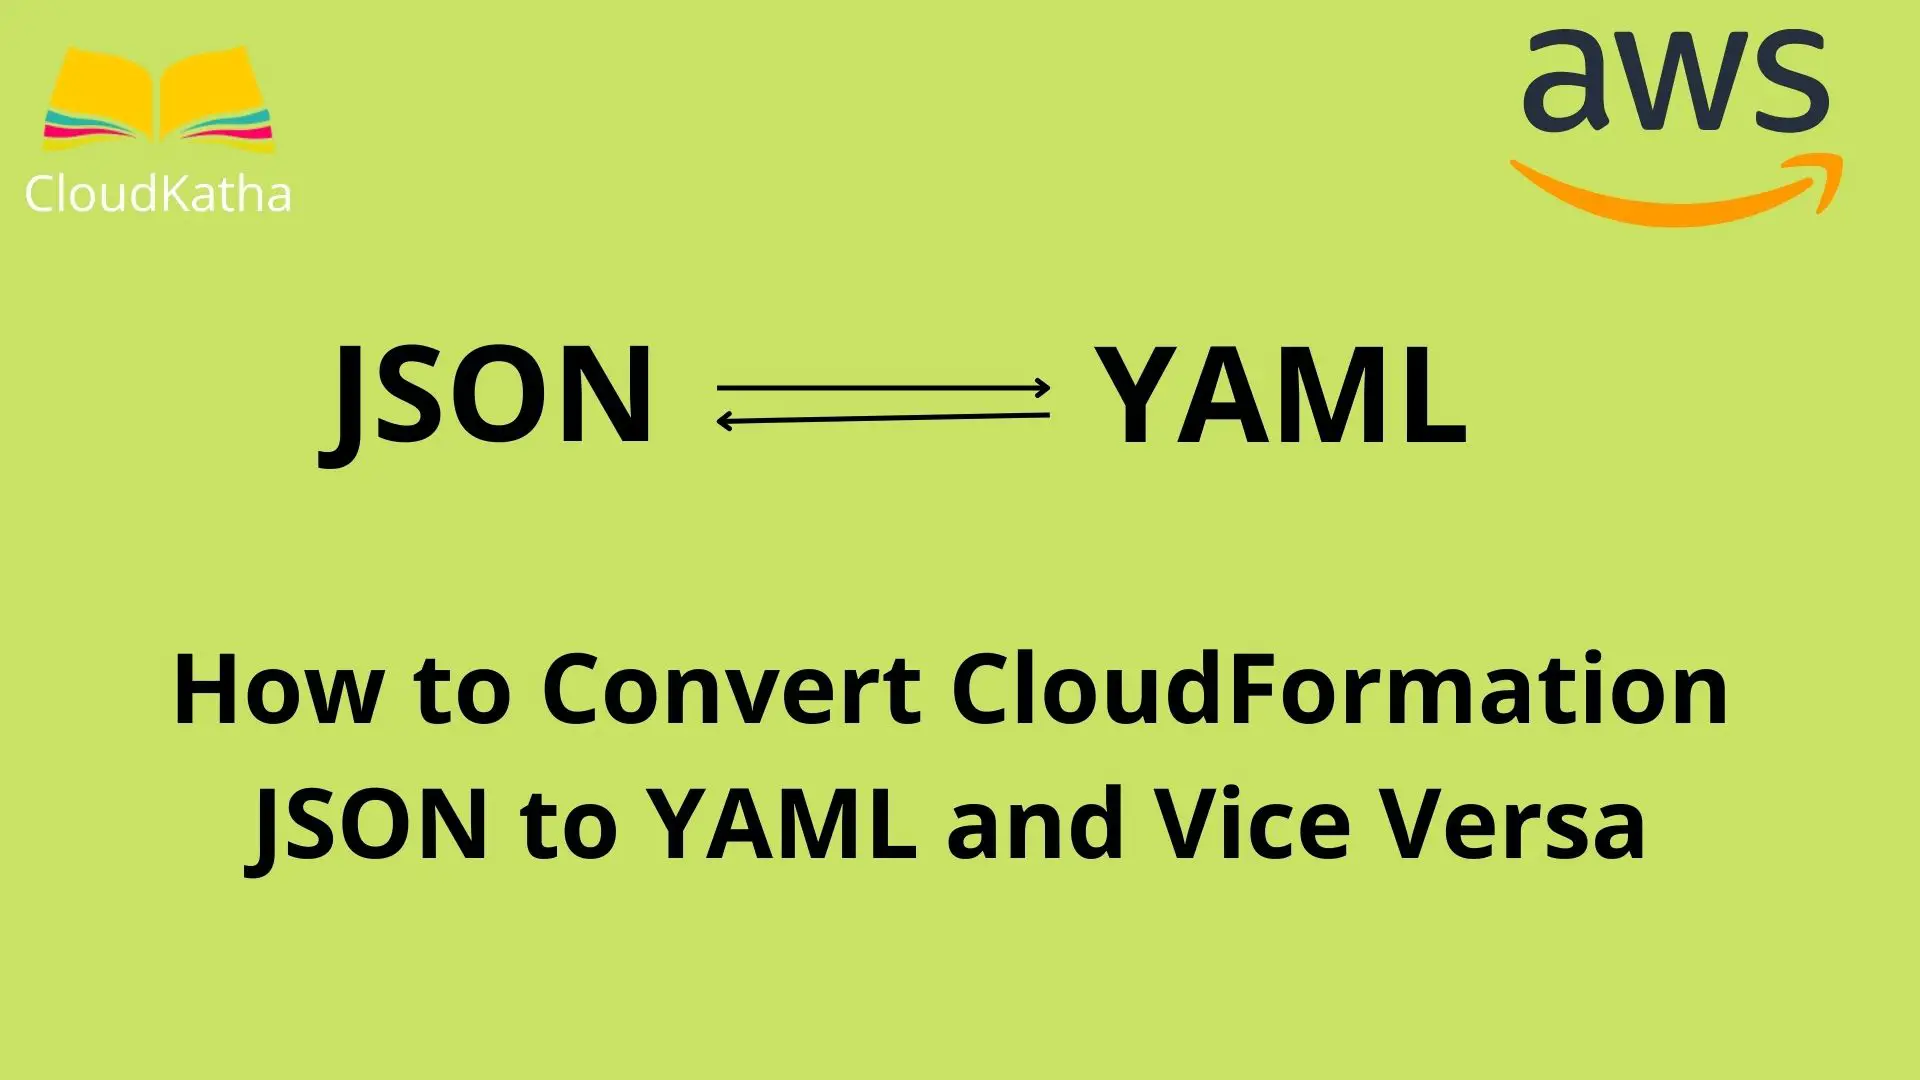 How to Convert CloudFormation JSON to YAML and Vice Versa